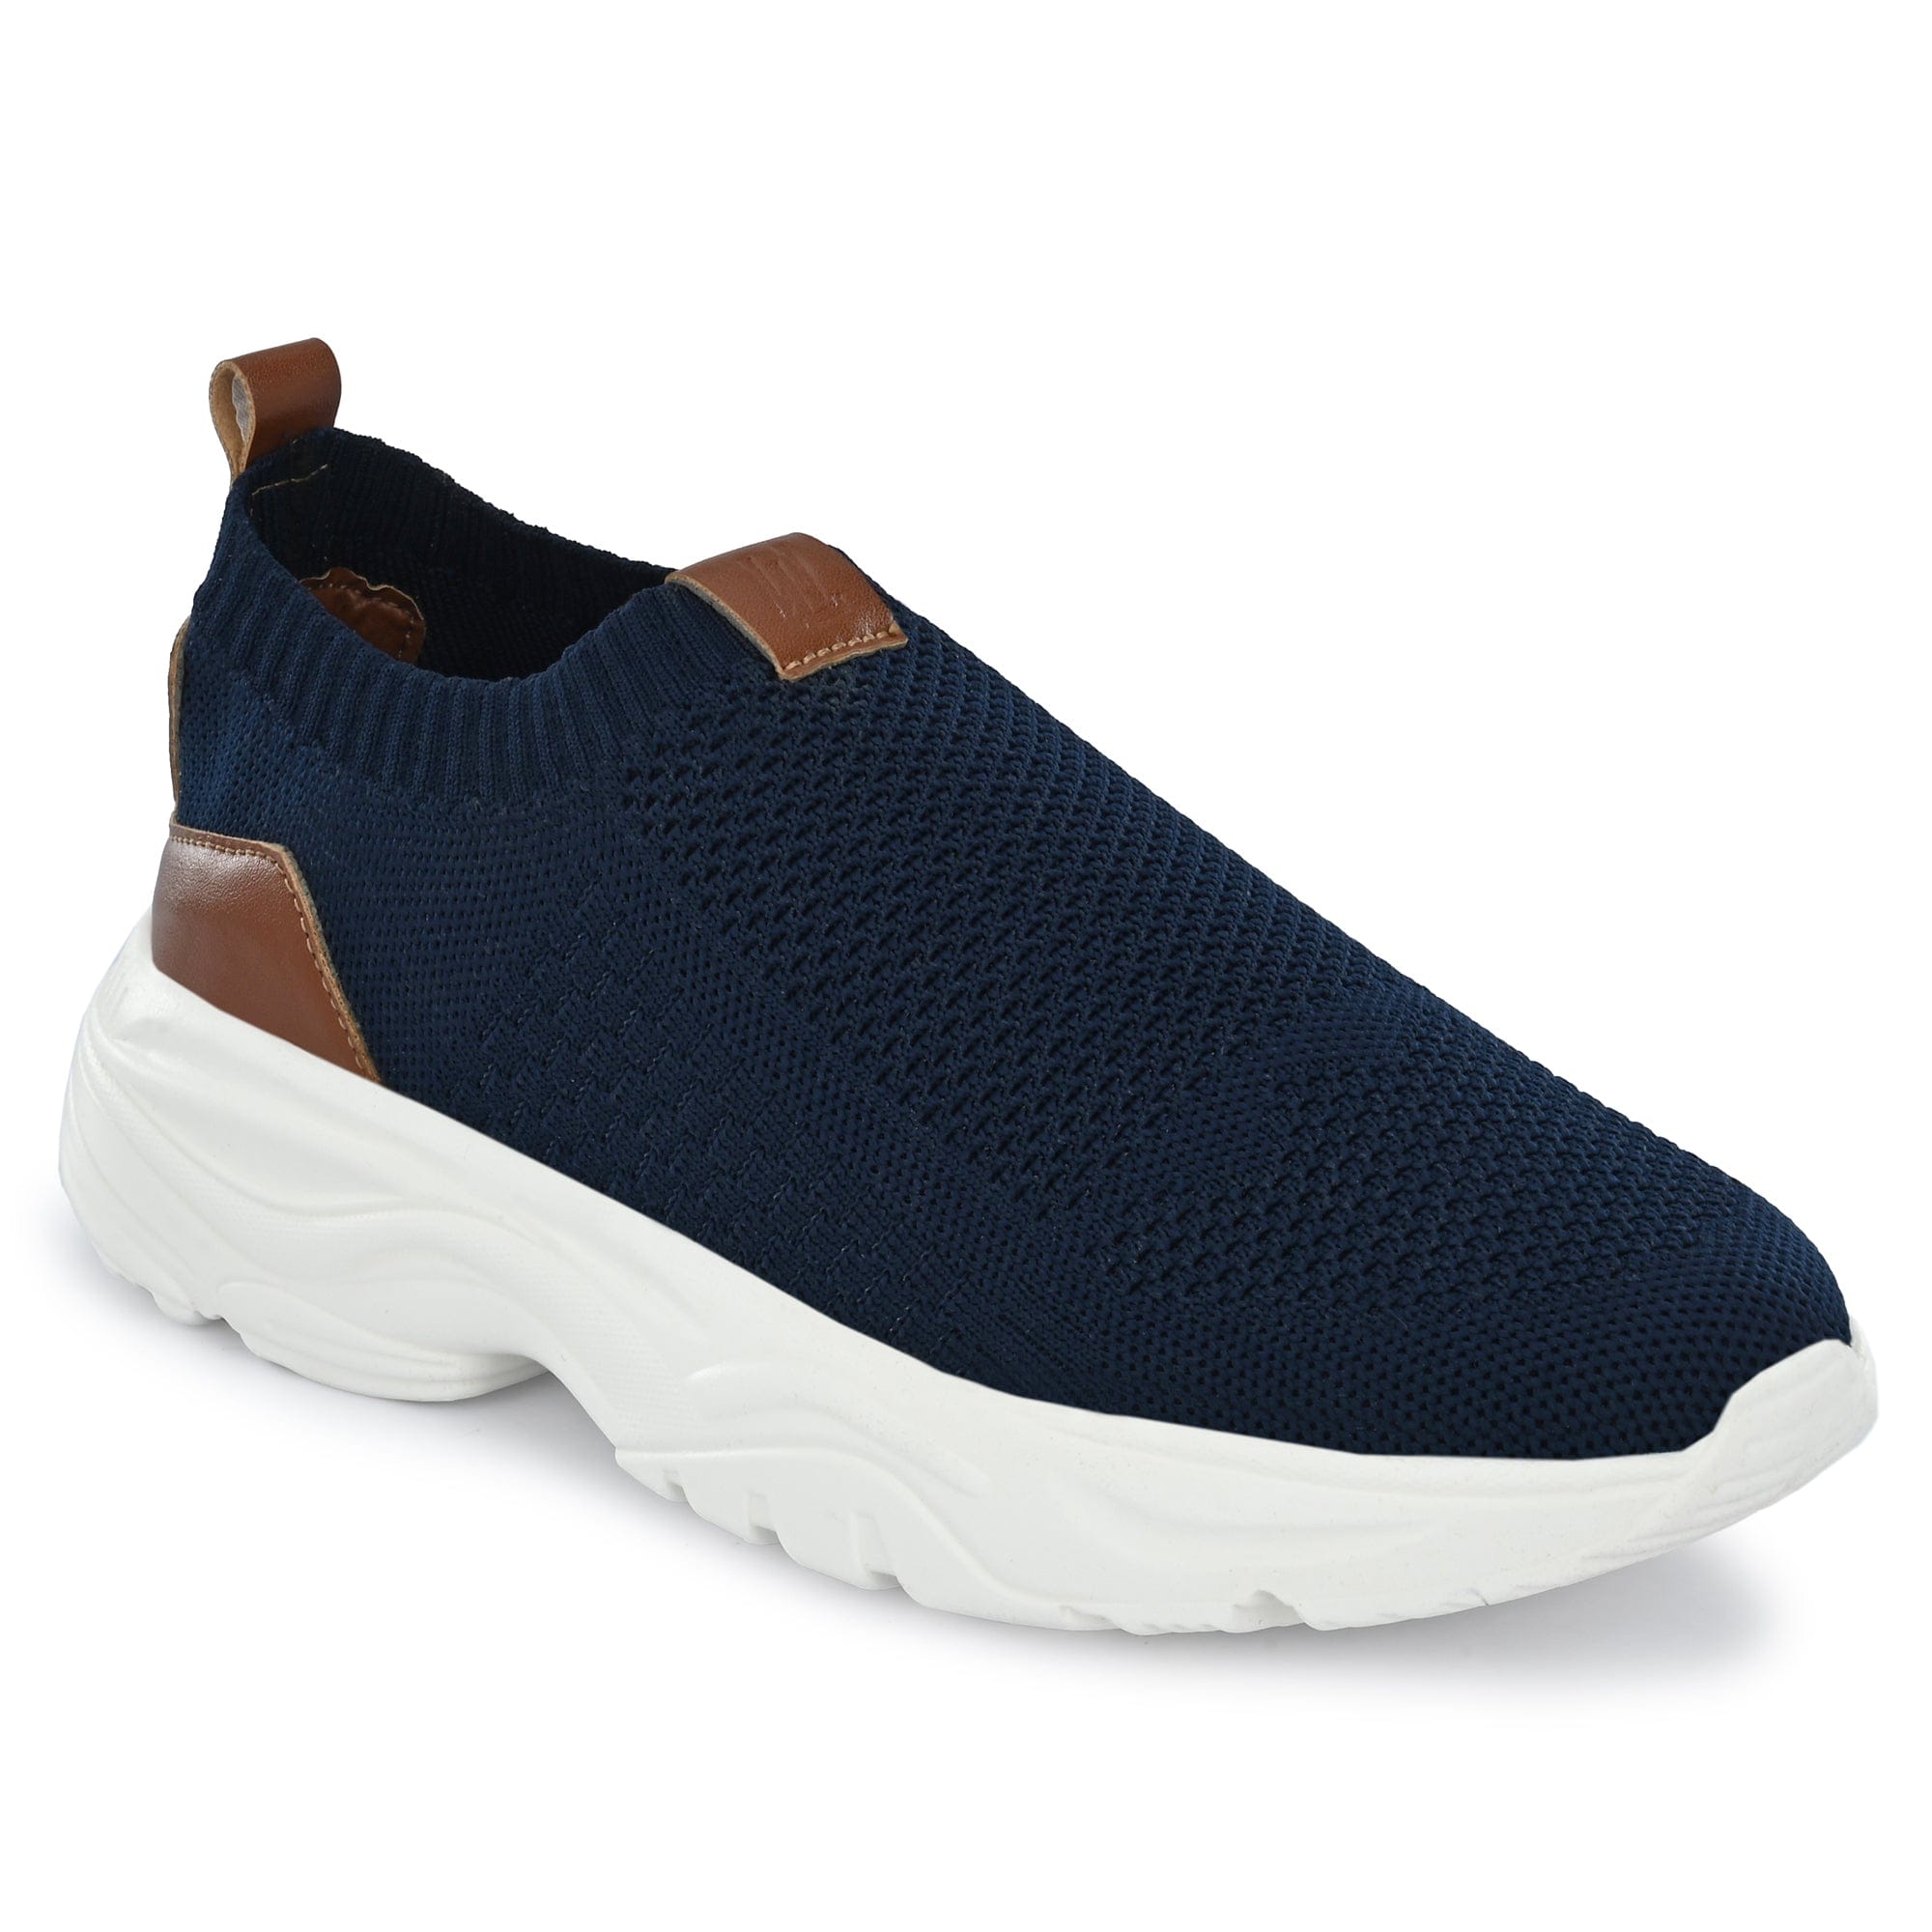 Legwork Ultra Navy Blue Comfortable ProKnit Sneakers Shoes made with 100% Recycled Plastic Bottles